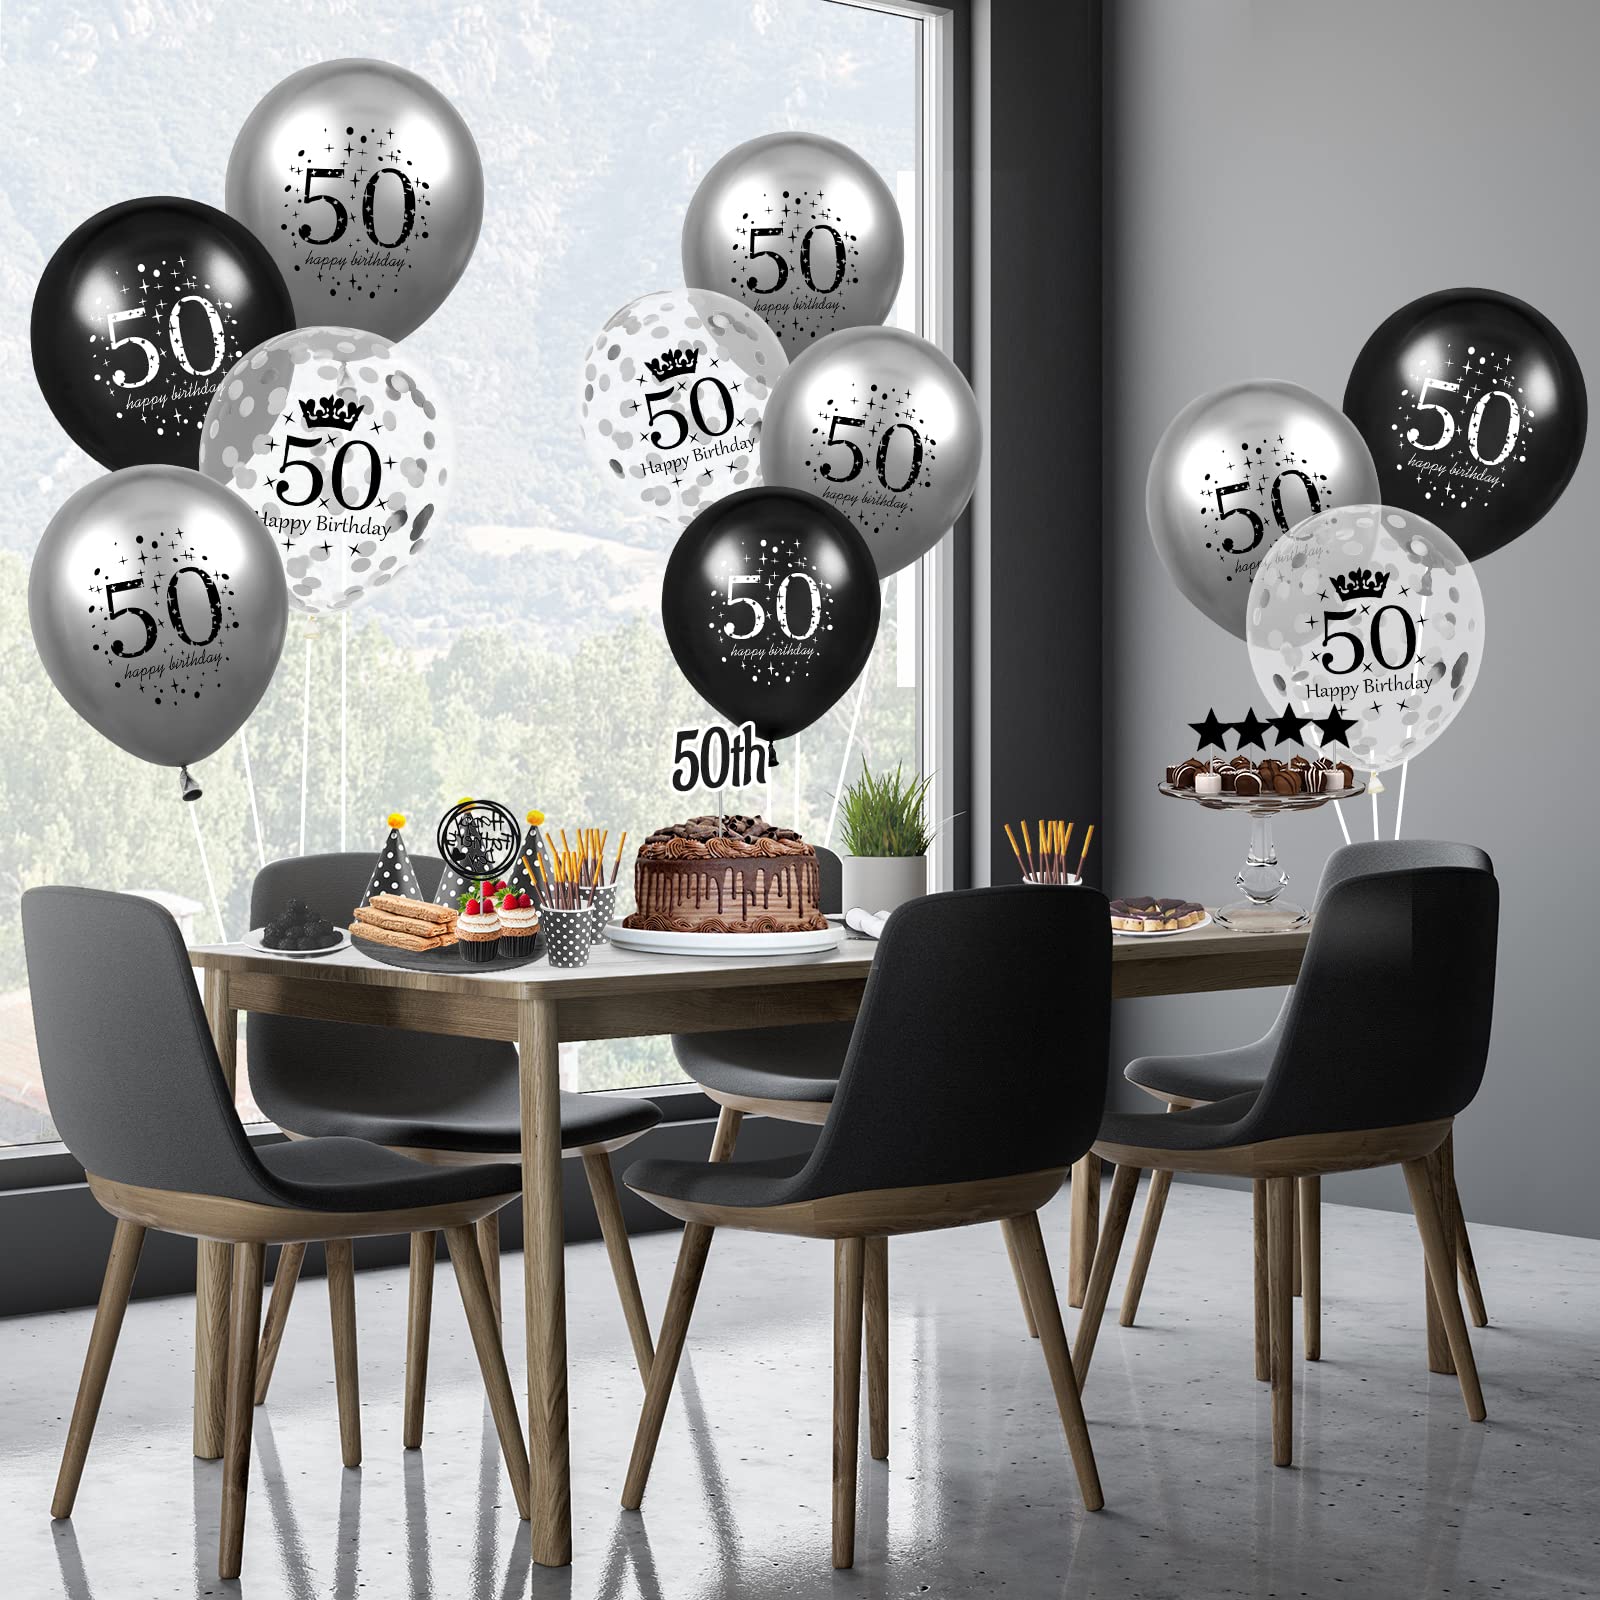 50th Birthday Balloons Decorations 15pcs Black Silver Happy 50th Birthday Party Latex Confetti Balloons for Men Women 50th Anniversary Happy Birthday Party Decor Supplies 12 inches